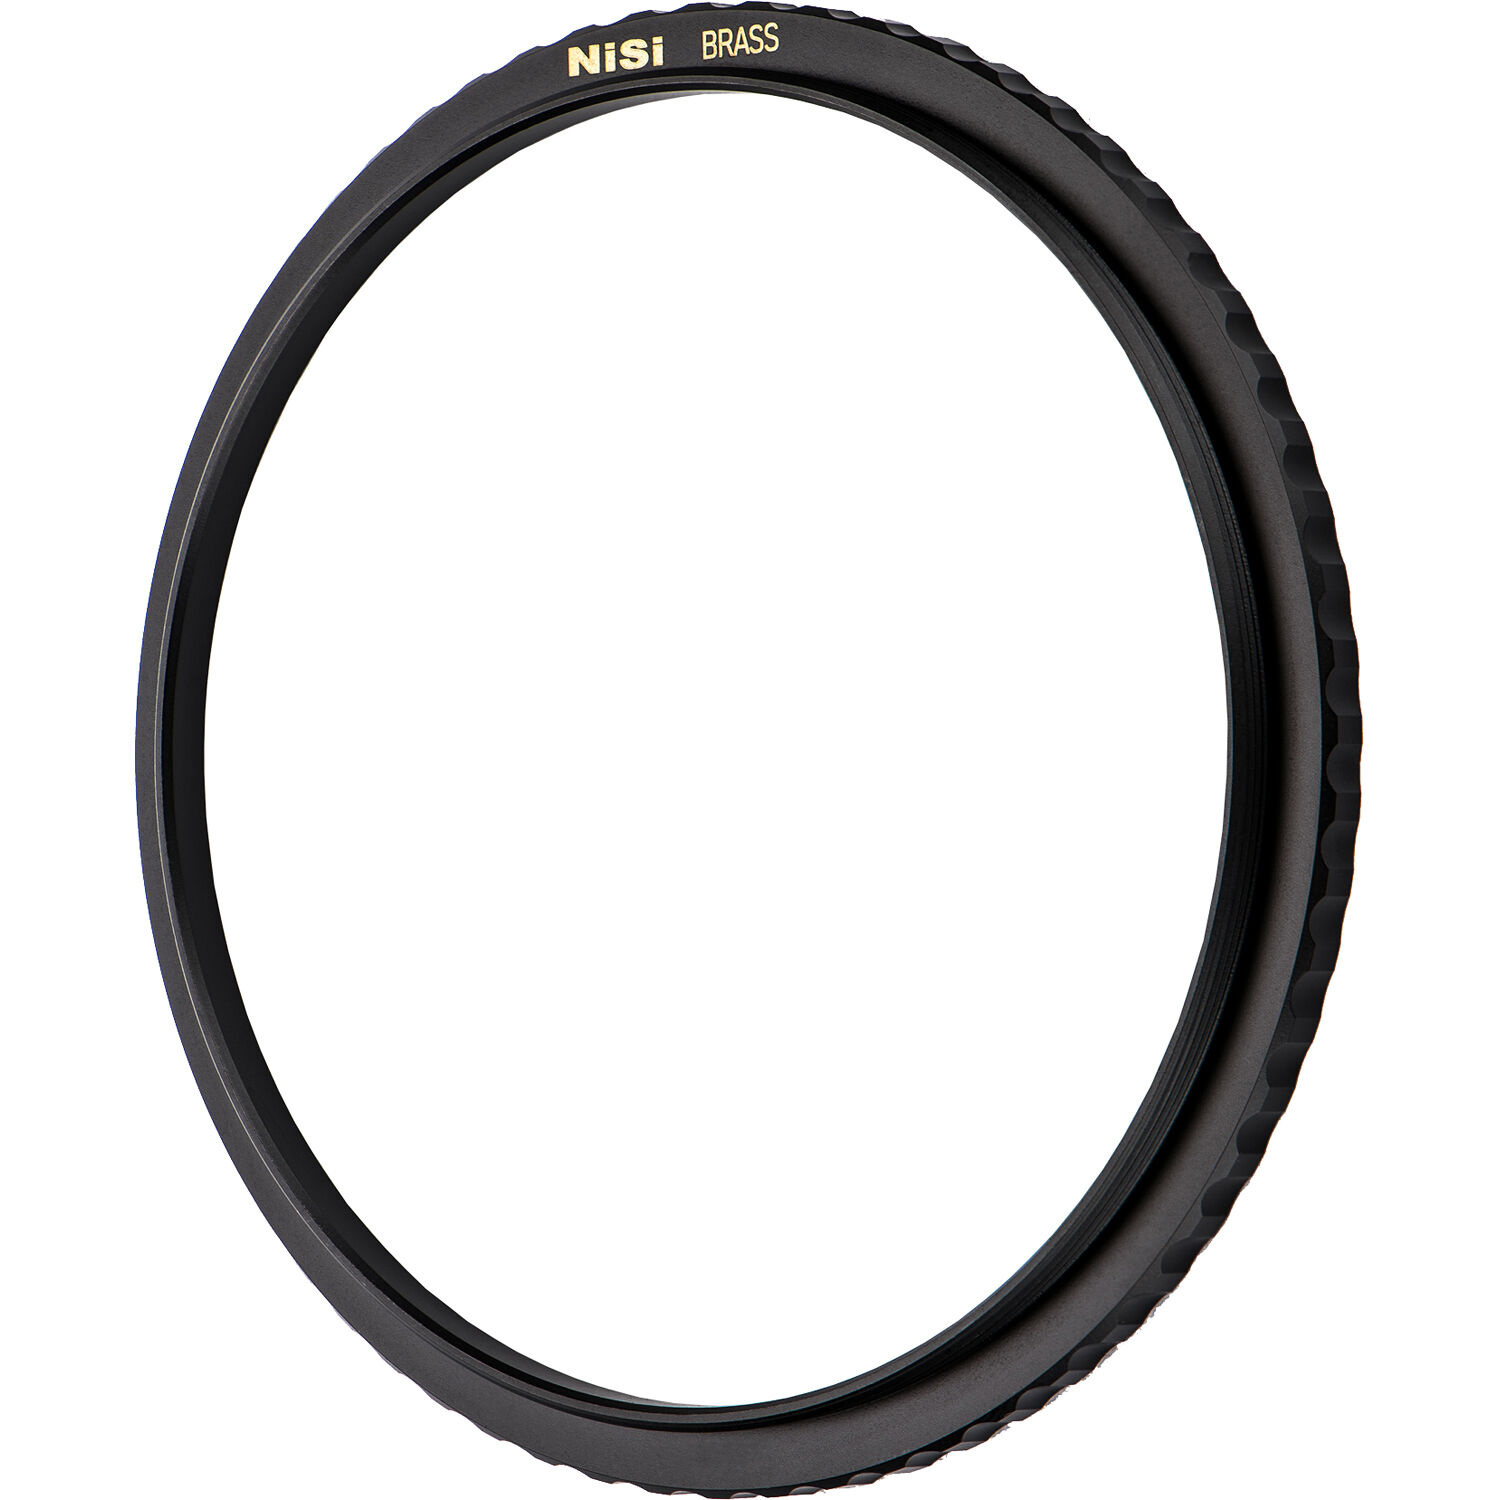 NiSi Brass Pro 46-49mm Step-Up Ring